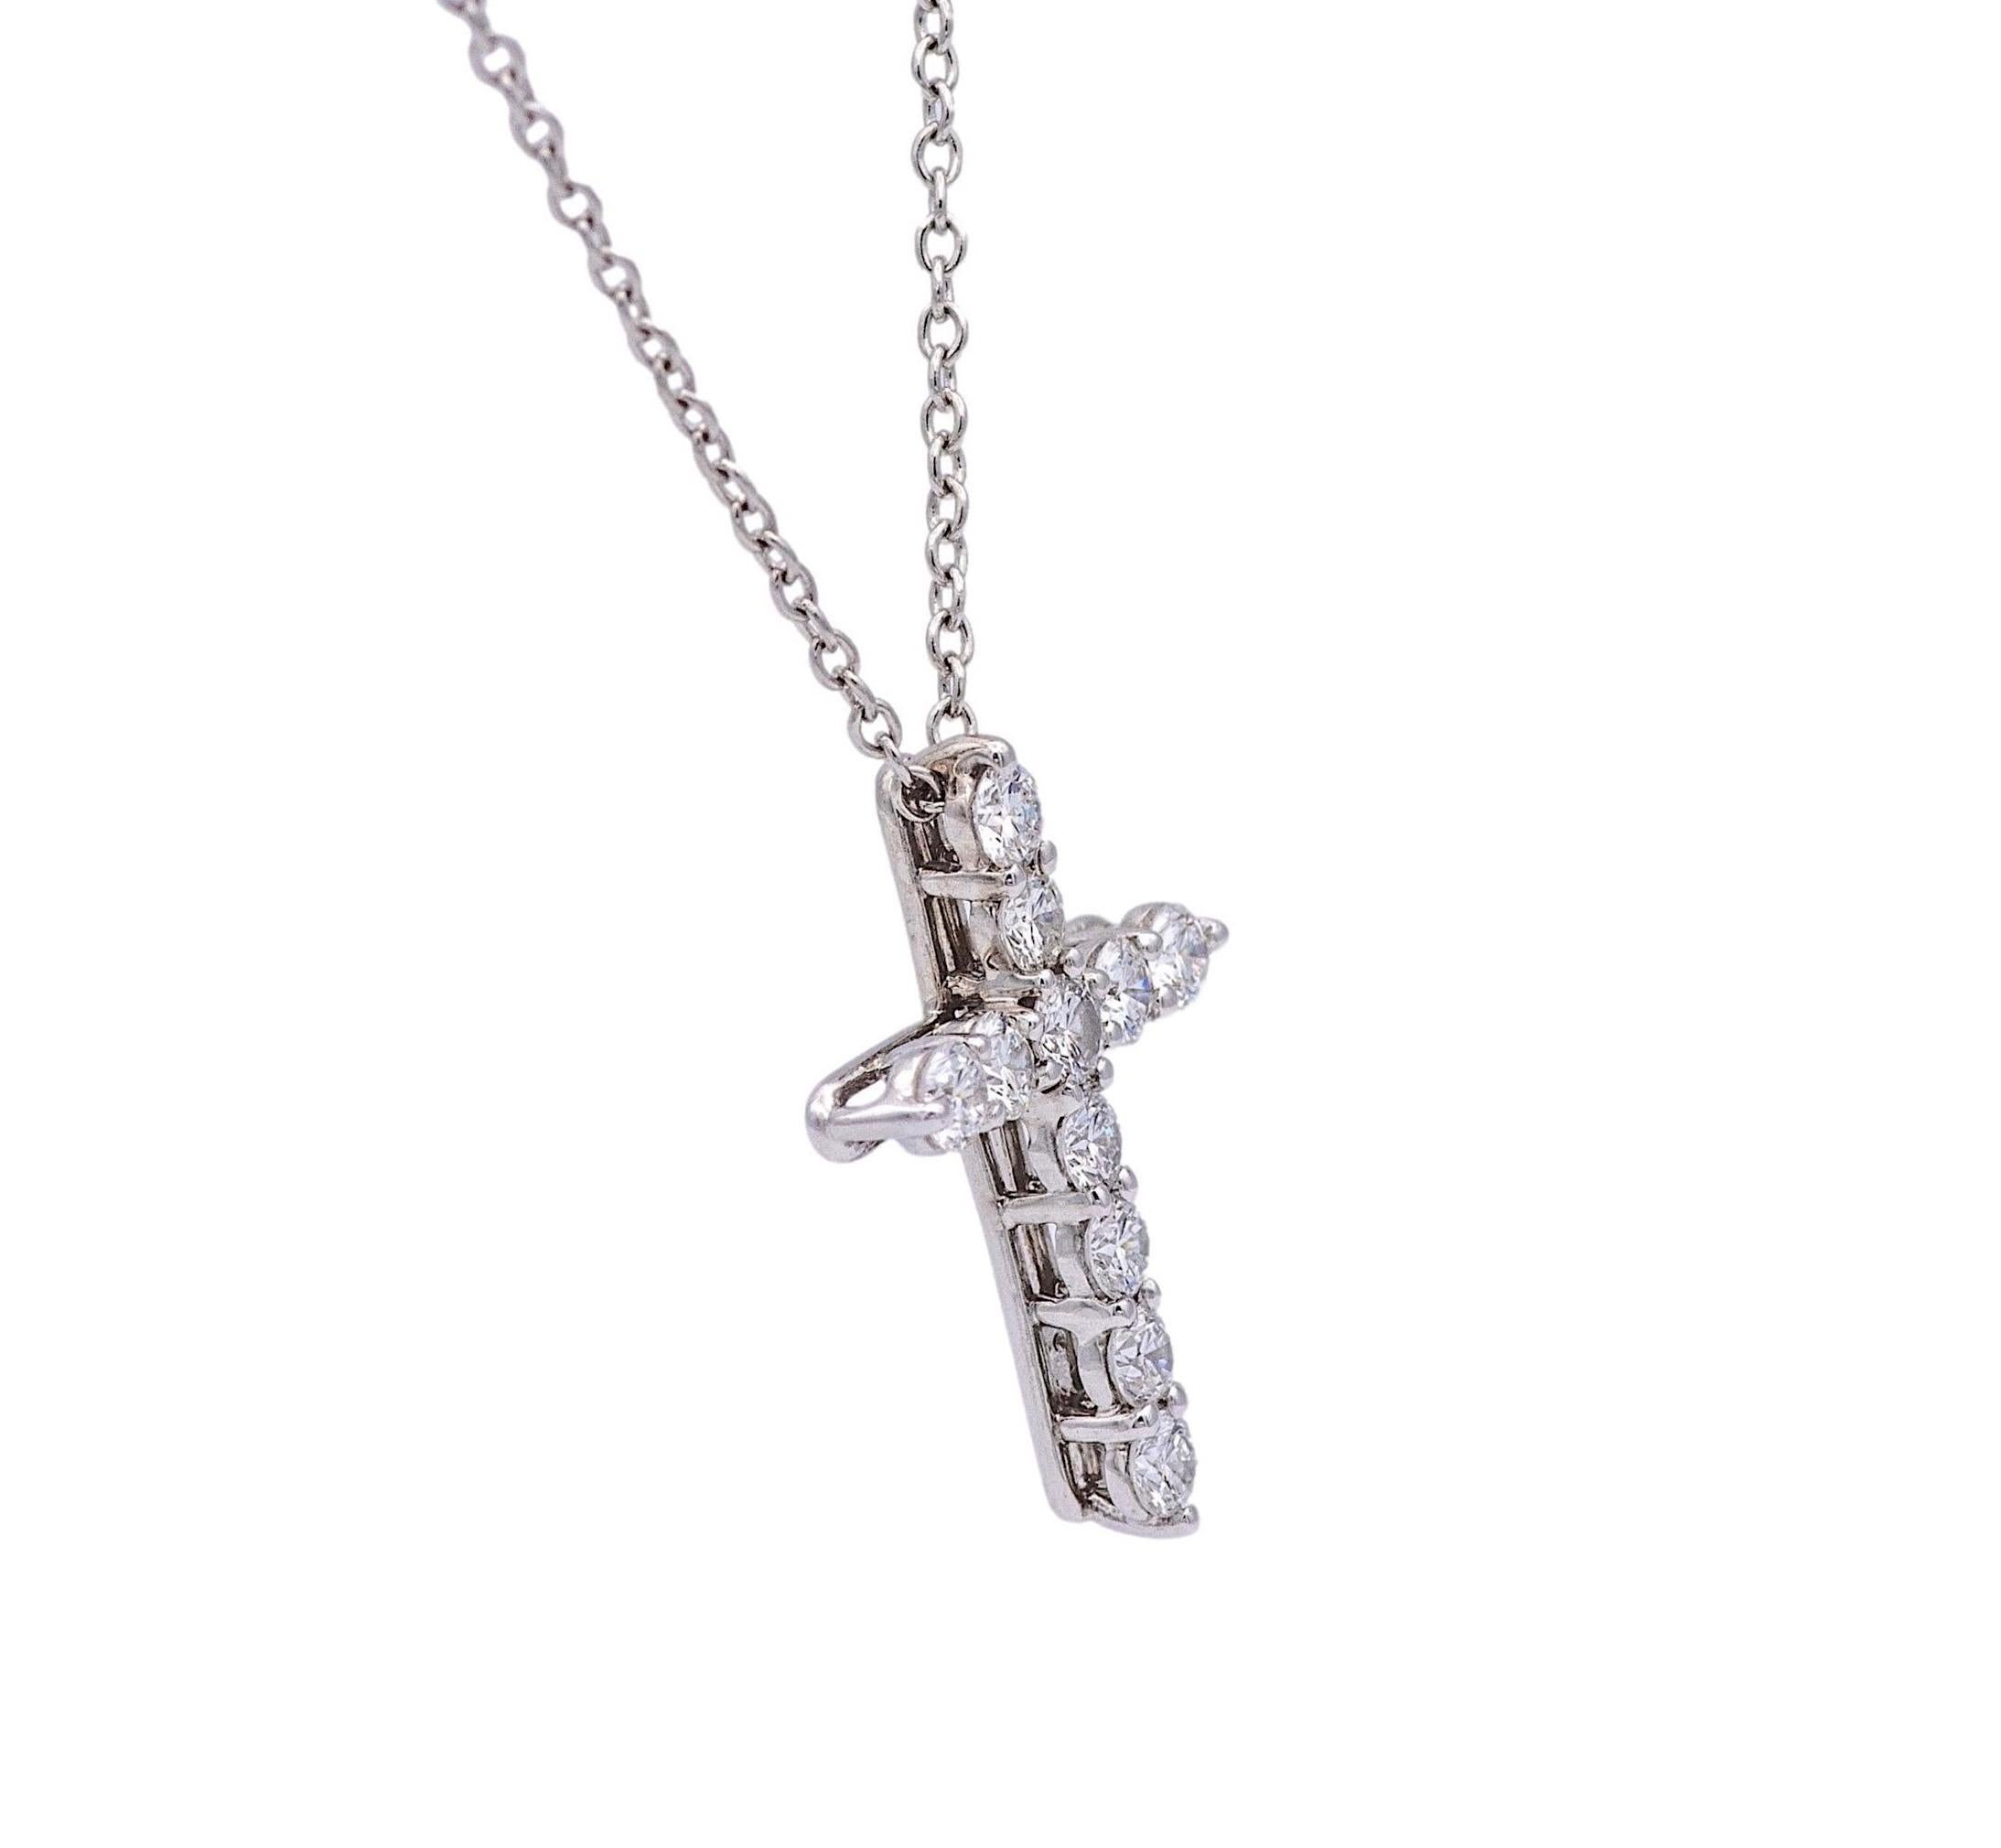 Tiffany & Co. necklace finely crafted in platinum featuring a cross motif slide pendant hanging off a 16